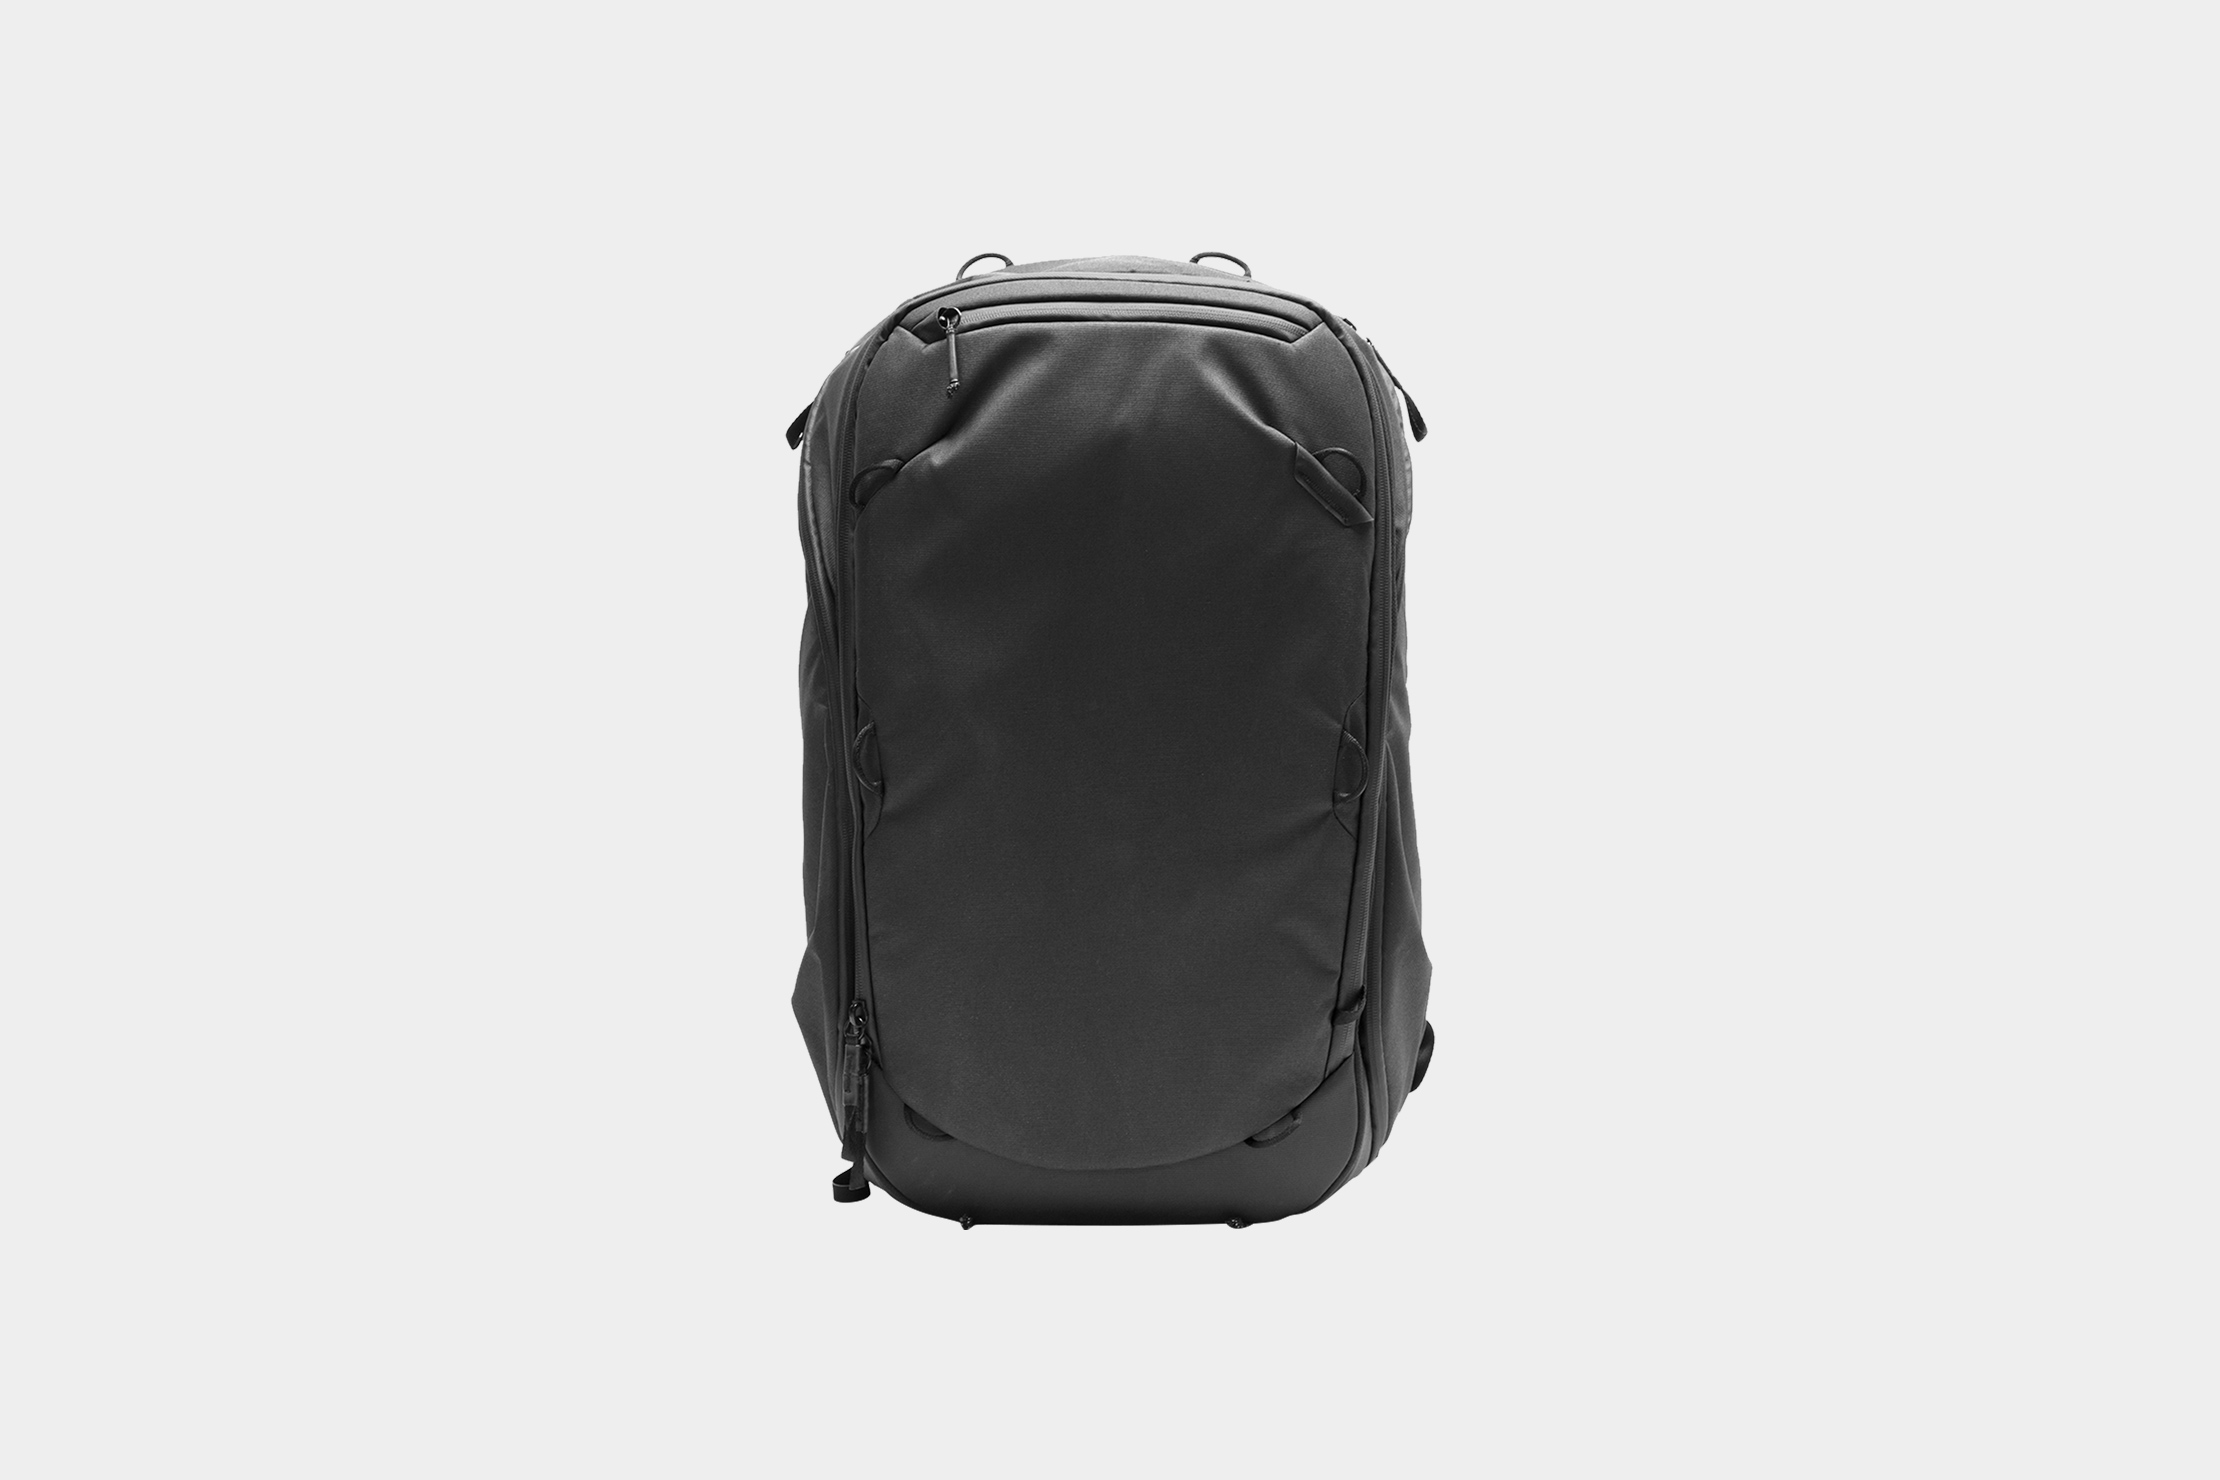 Travel Hack Backpack Review: Is It Worth It?